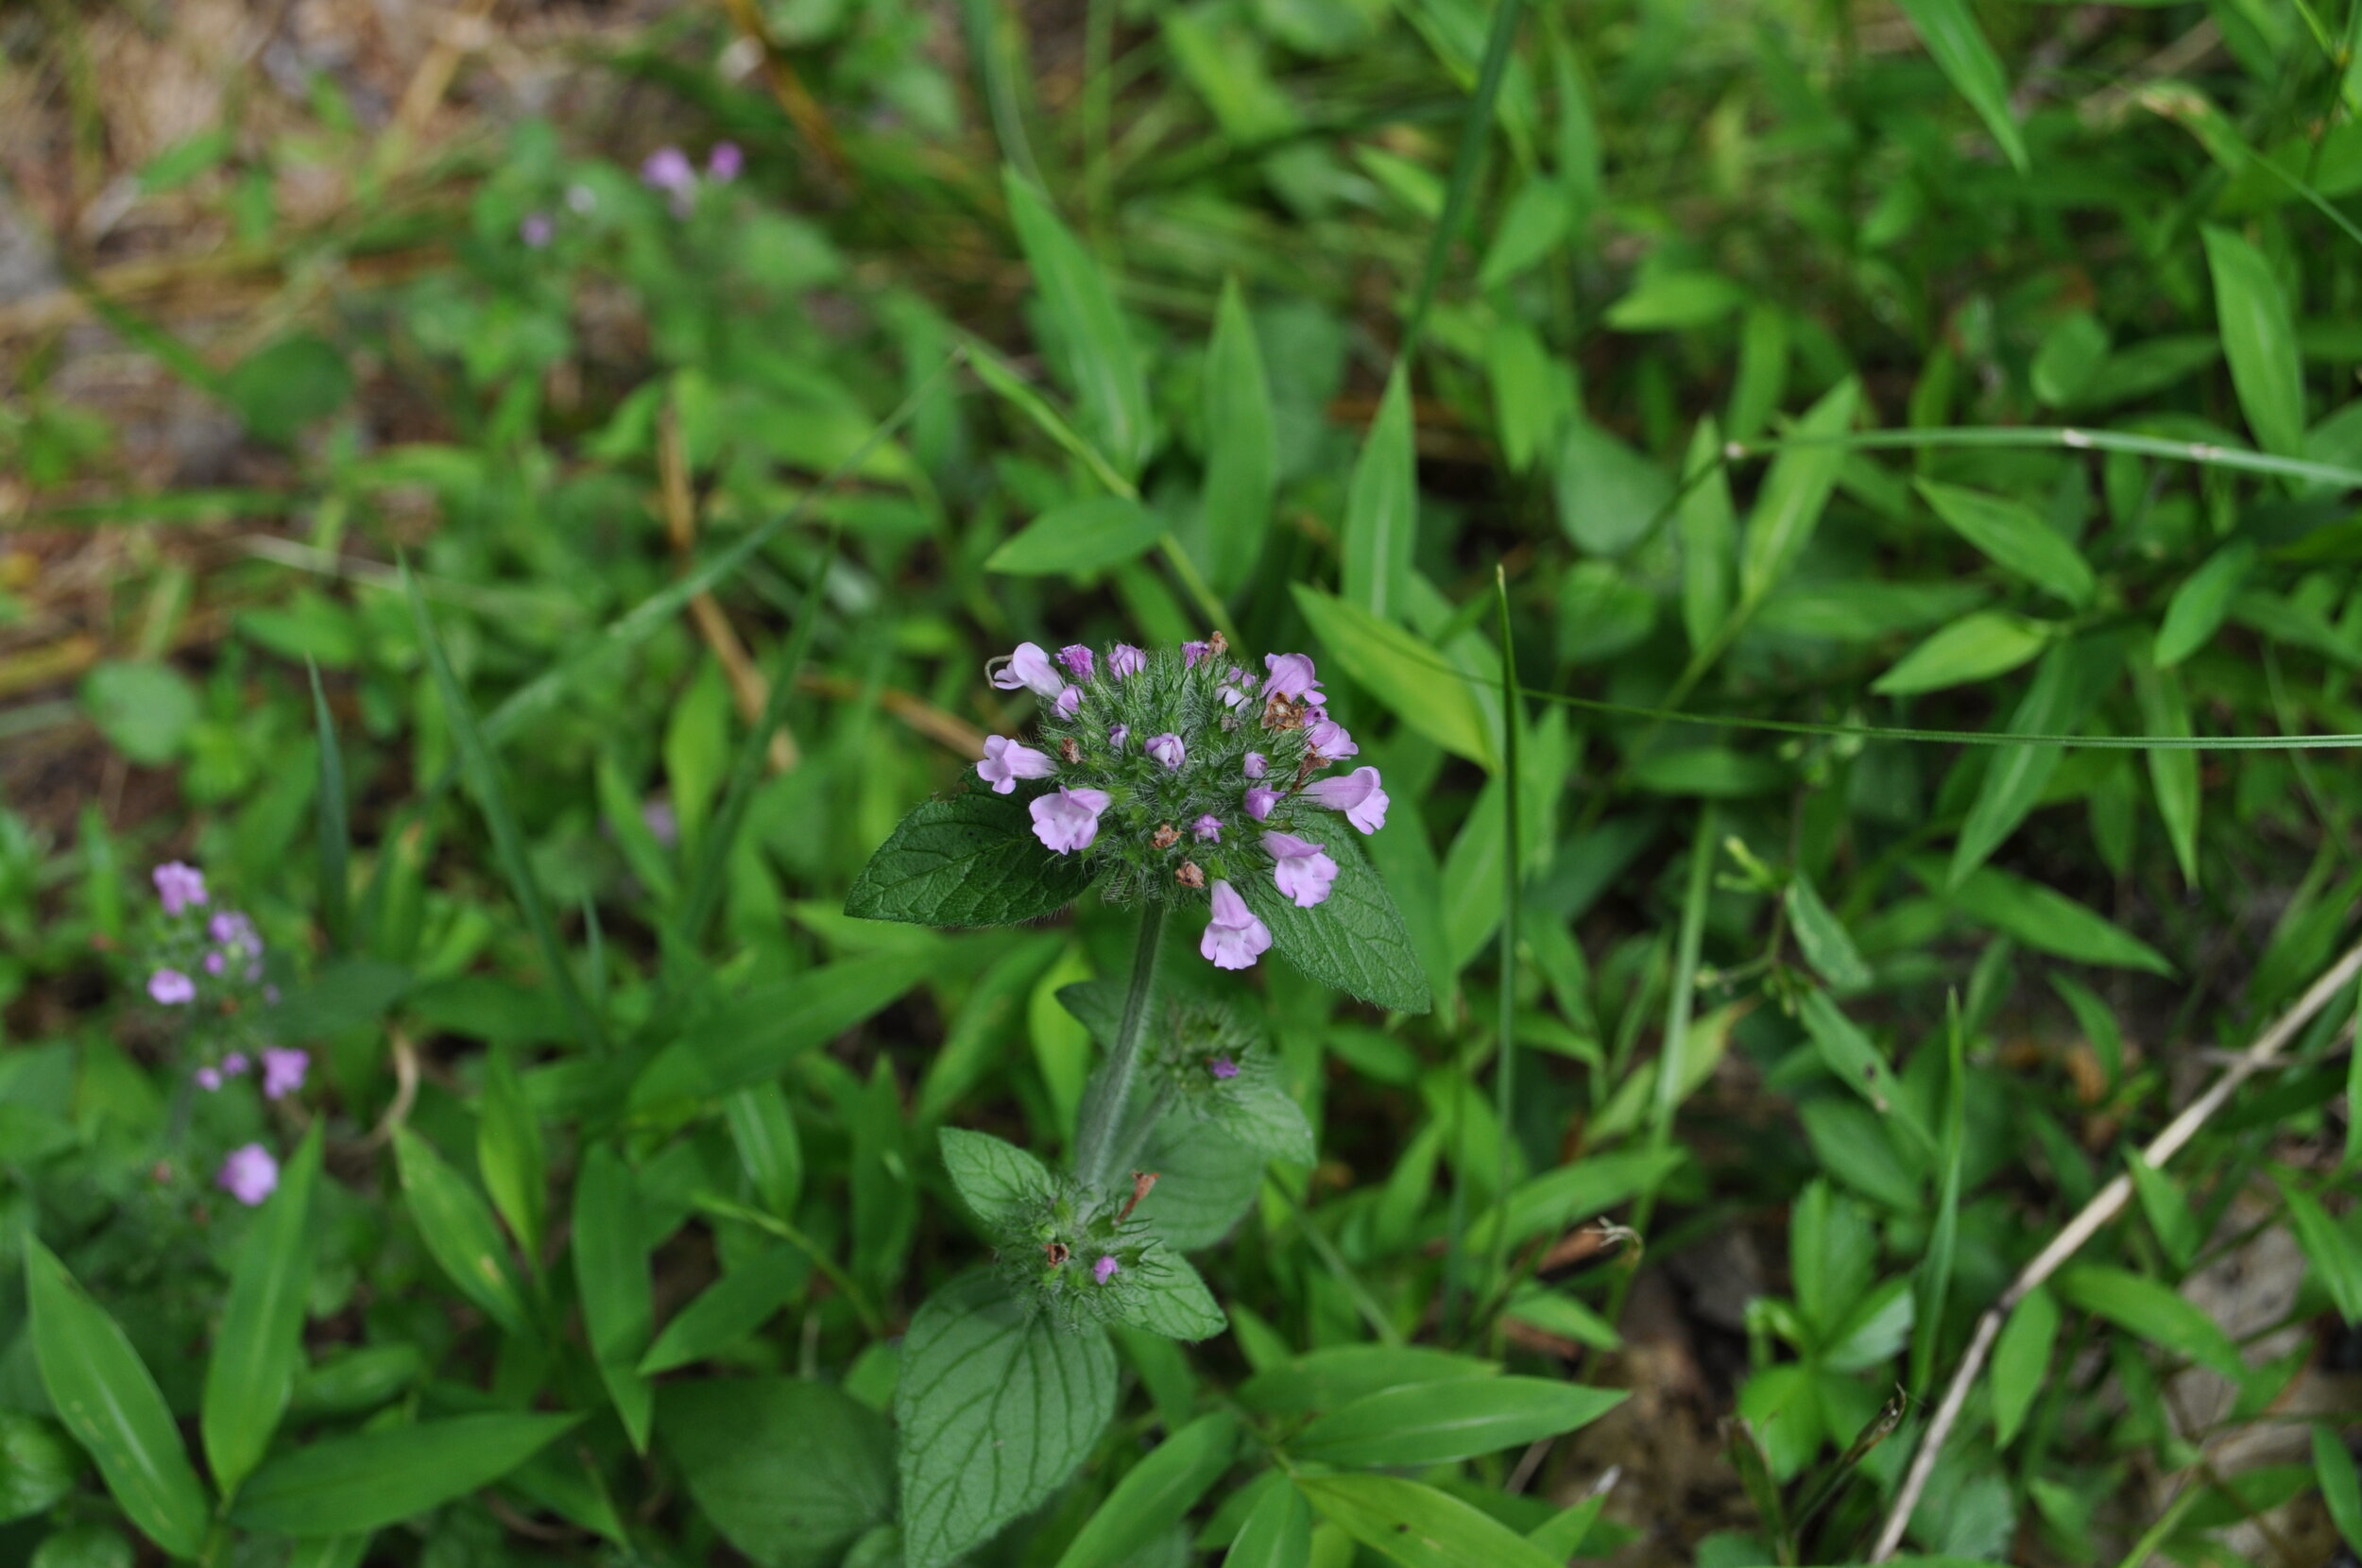 Wild Basil photo by Kaia Waxenberg You can read our article on Growing and Using Basil